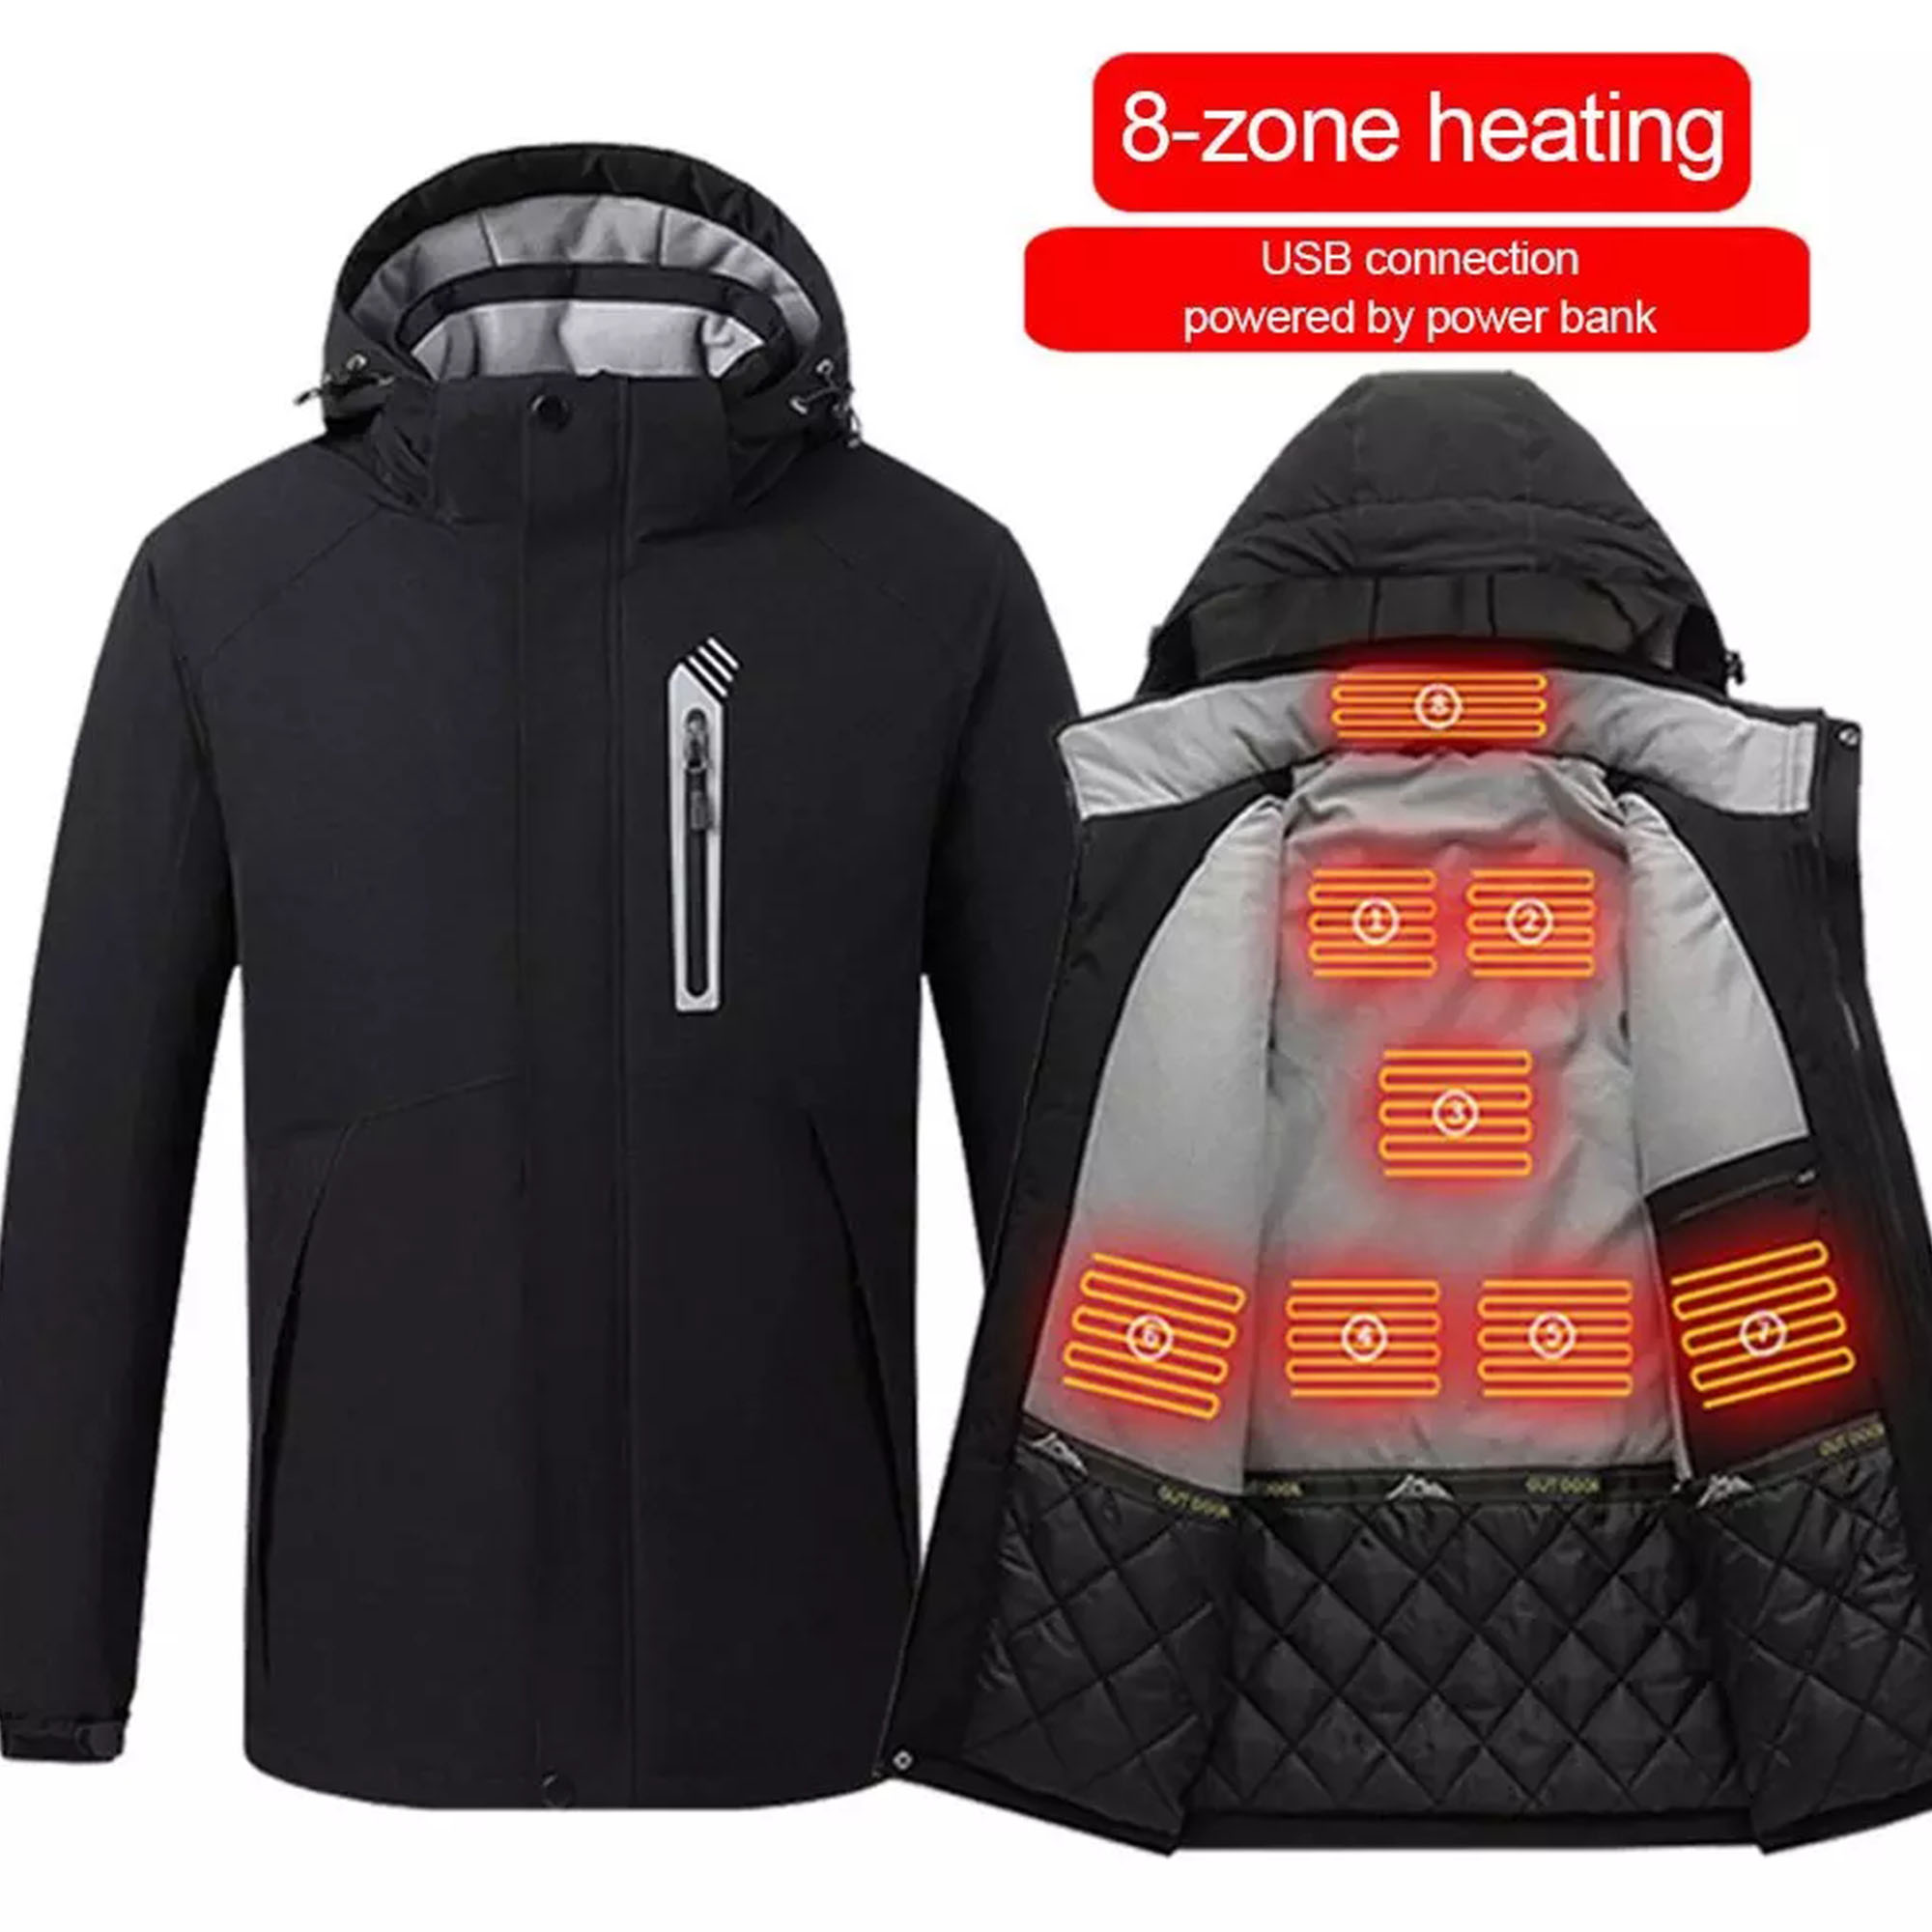 UKAP Mens Electric Heated Jacket with Detachable Hood (Battery Included) Washable Unisex Winter Body Warmer Women Heating Coat Clothing - image 5 of 9